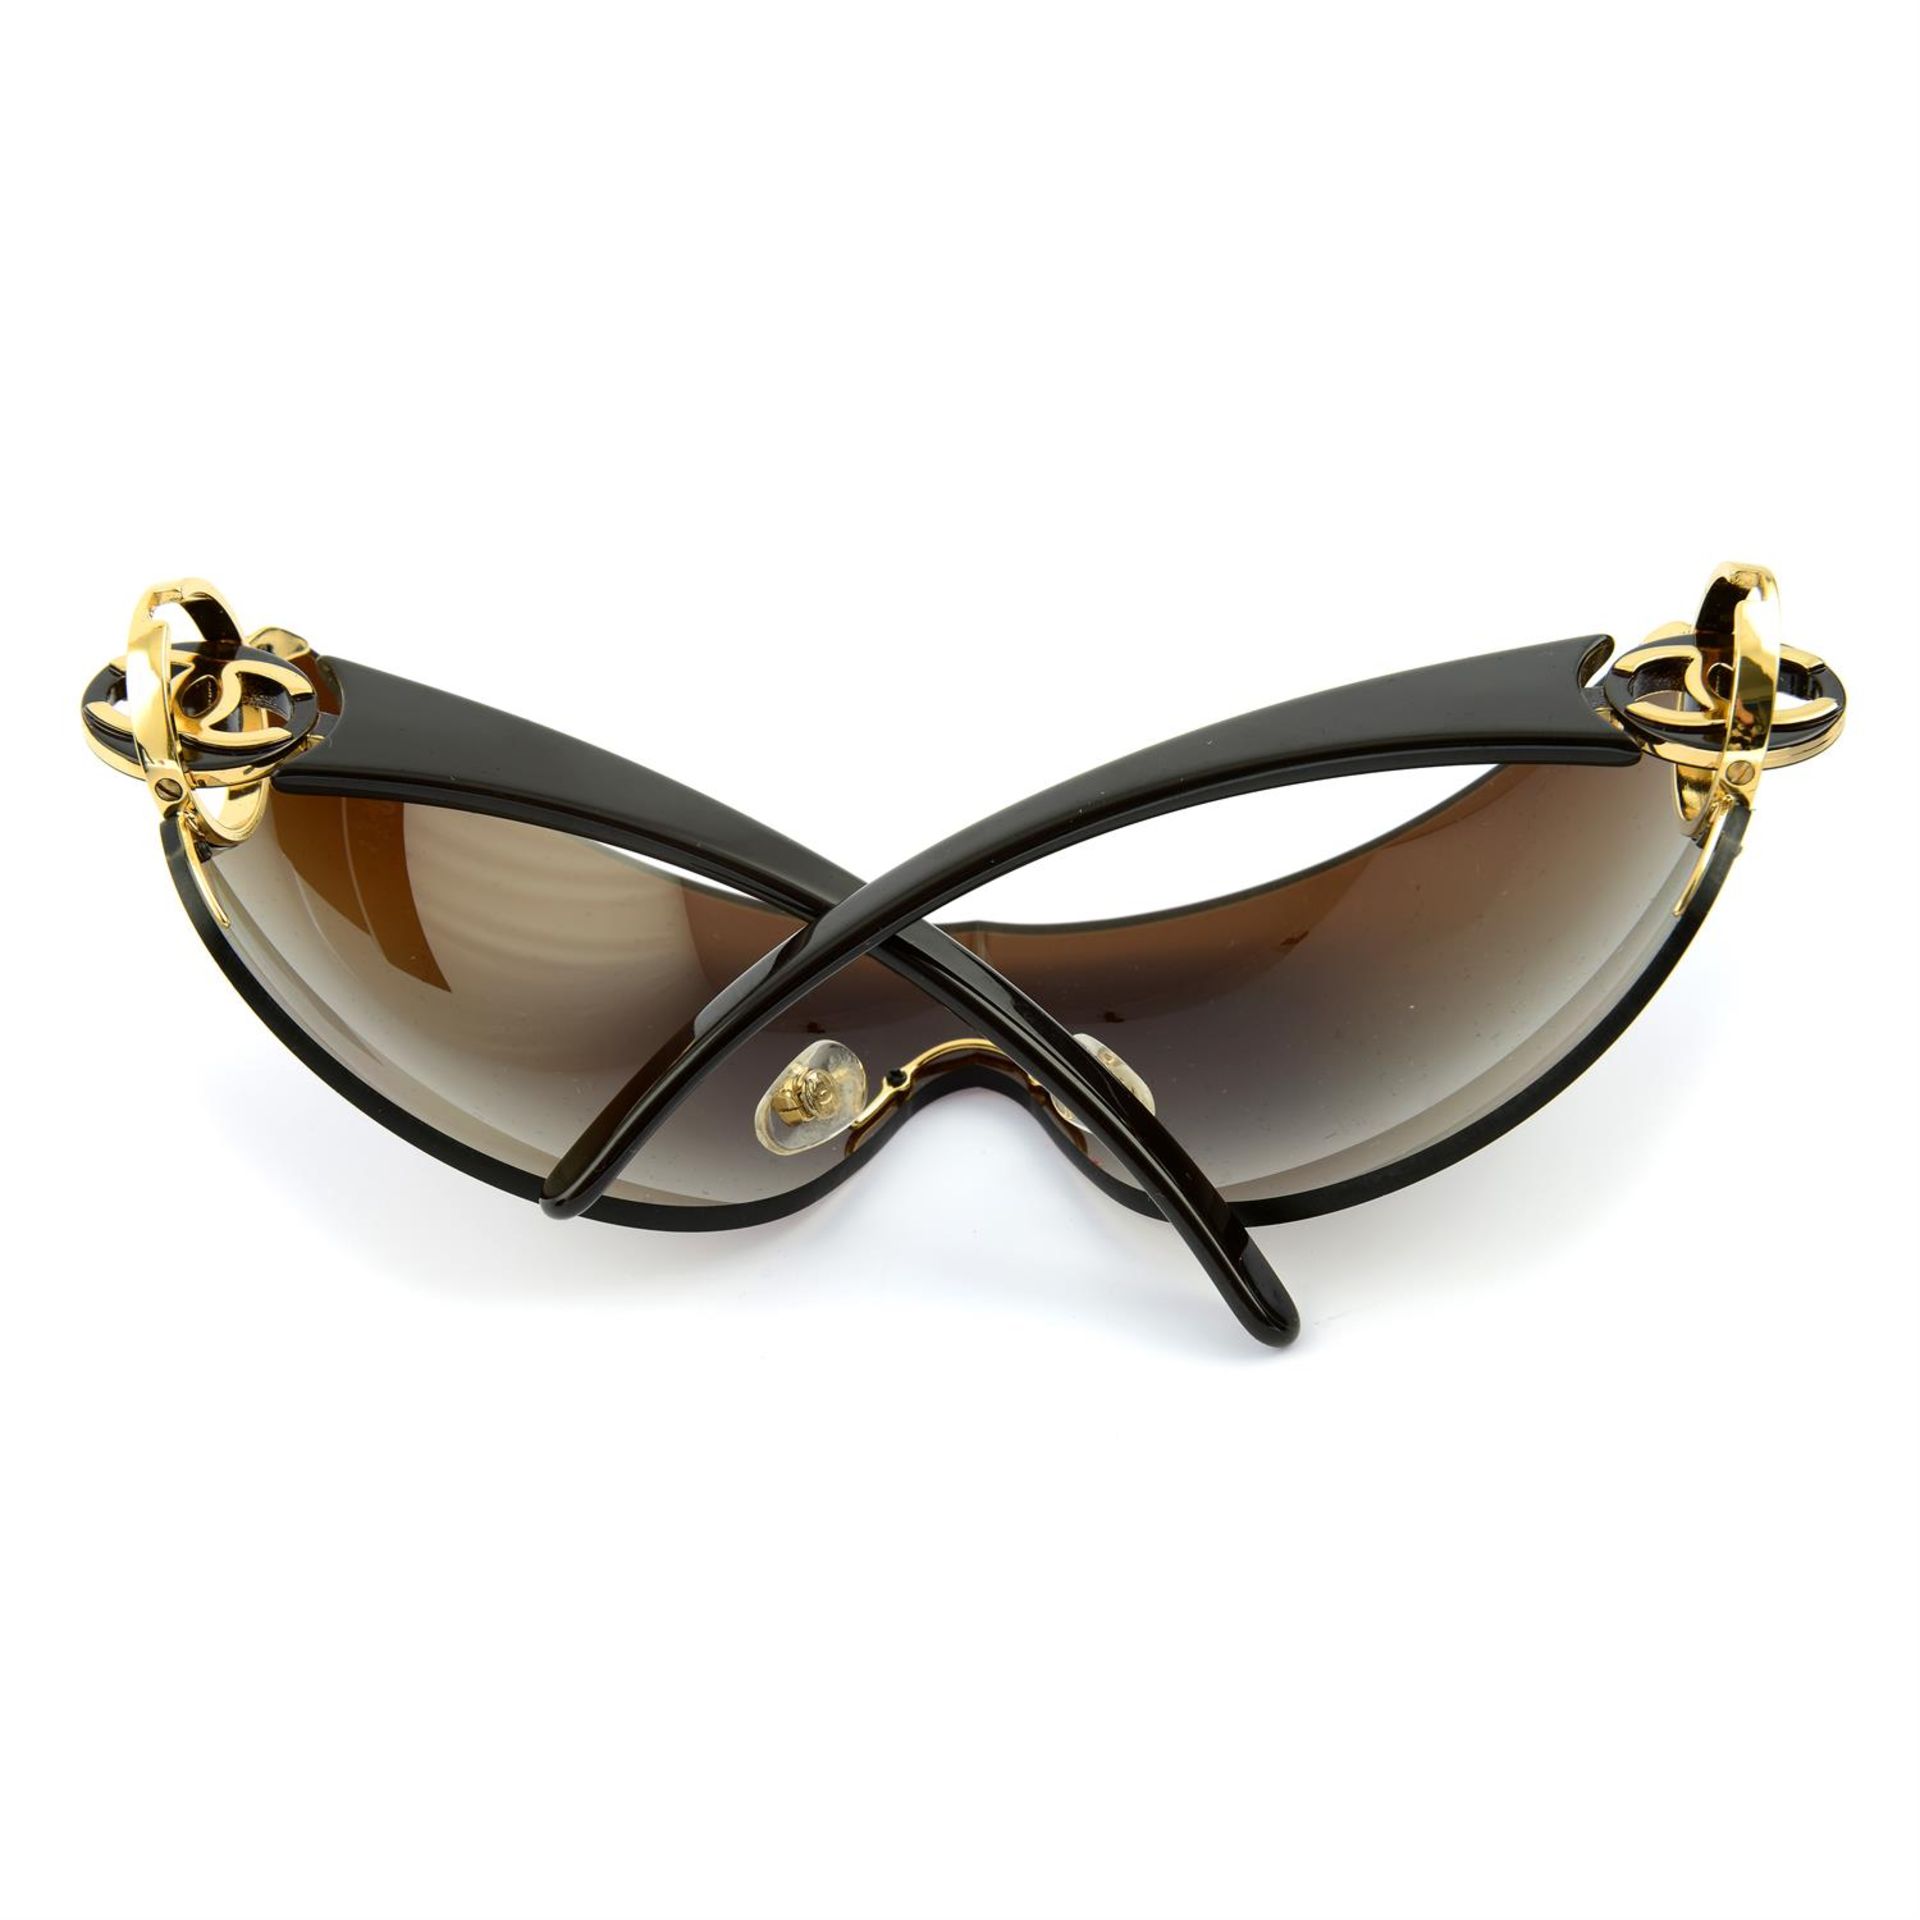 CHANEL - a pair of sunglasses. - Image 2 of 3